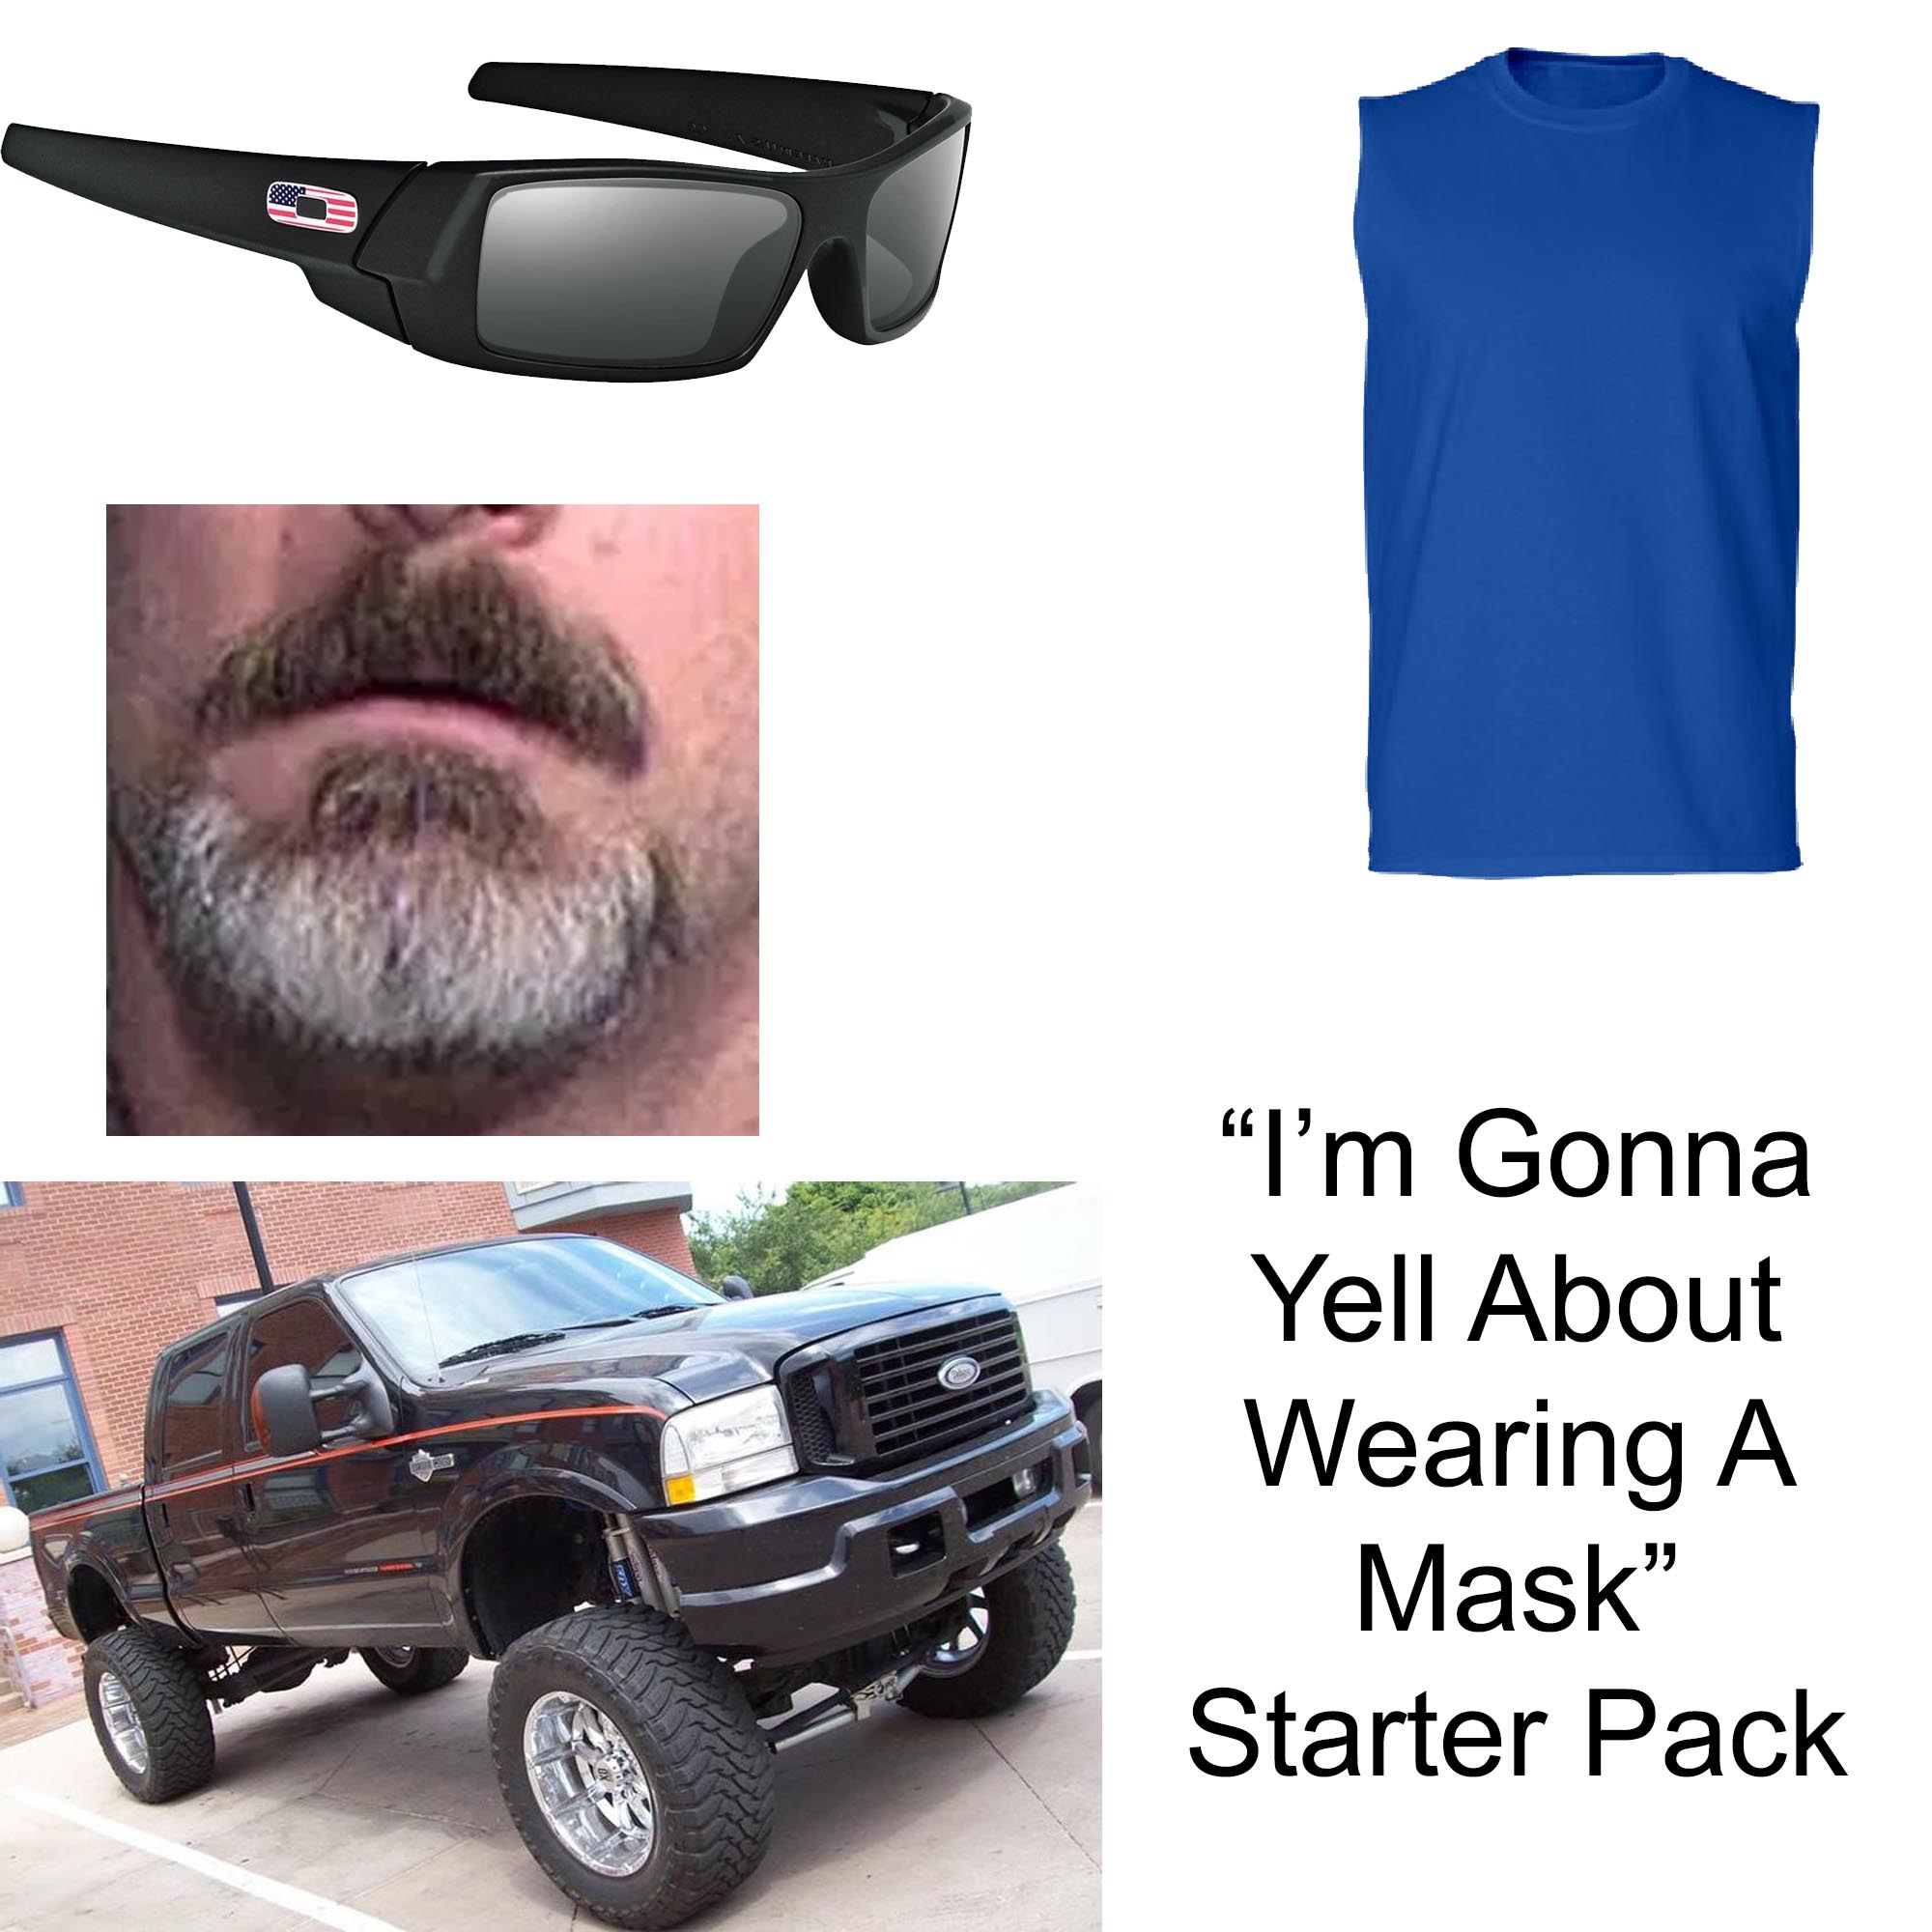 bumper - "I'm Gonna Yell About Wearing A Mask" Starter Pack